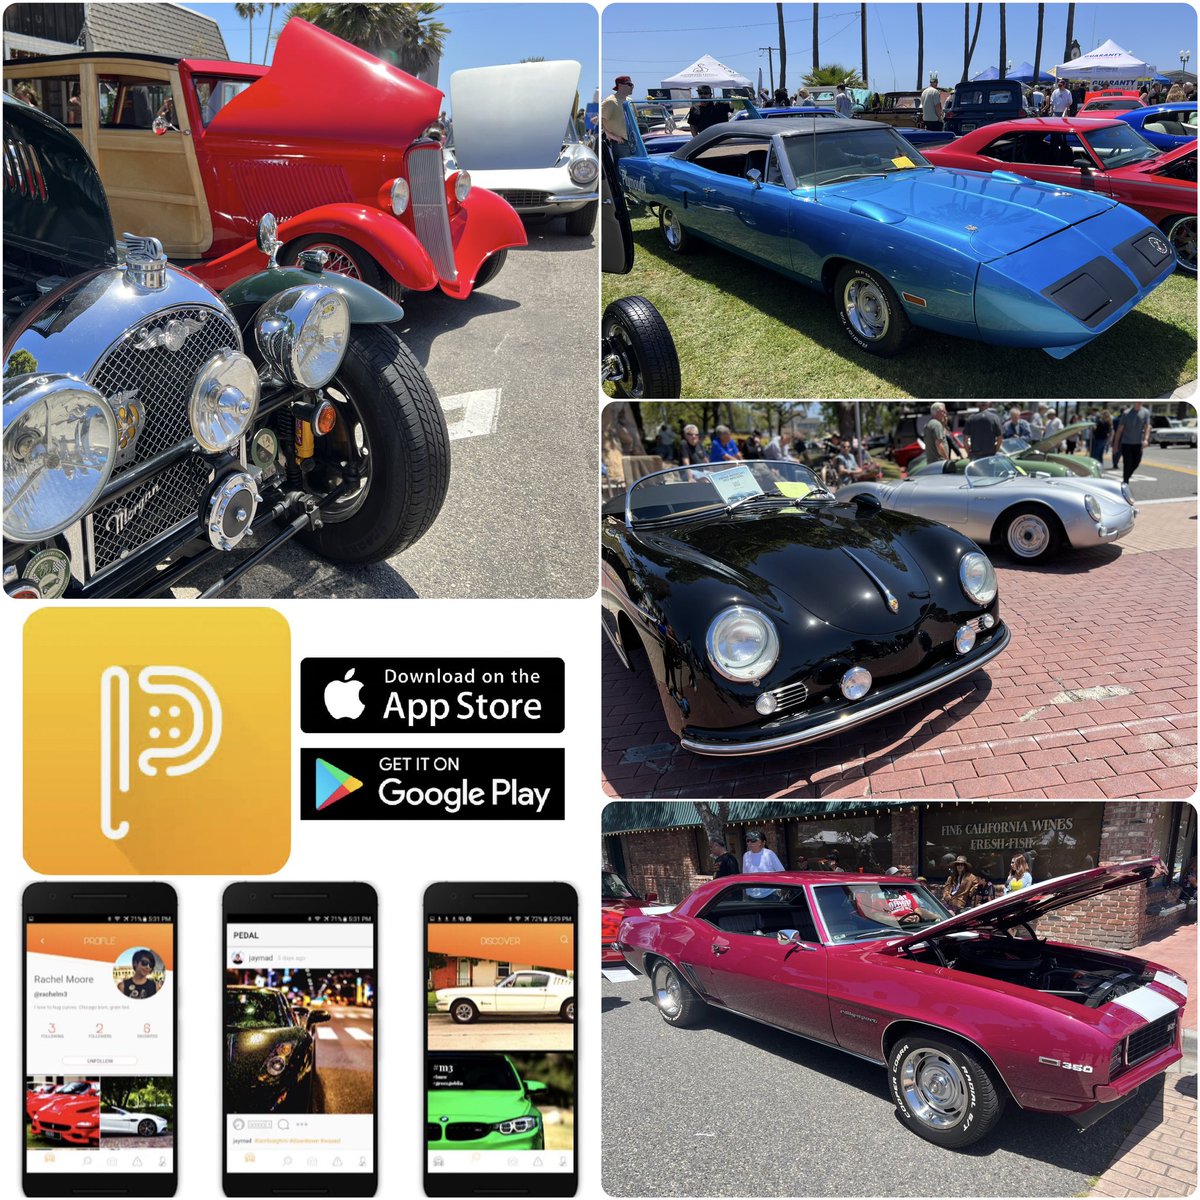 🔶 Seal Beach Classic Car Show ~ Awesome crowd and amazing cars
🔶 See more on PEDAL - Free in app stores

#sealbeachclassiccarshow #sealbeach #classiccarshow #classiccars #musclecar #exoticcars #luxurycars #supercars #dreamcars #pedaltheapp